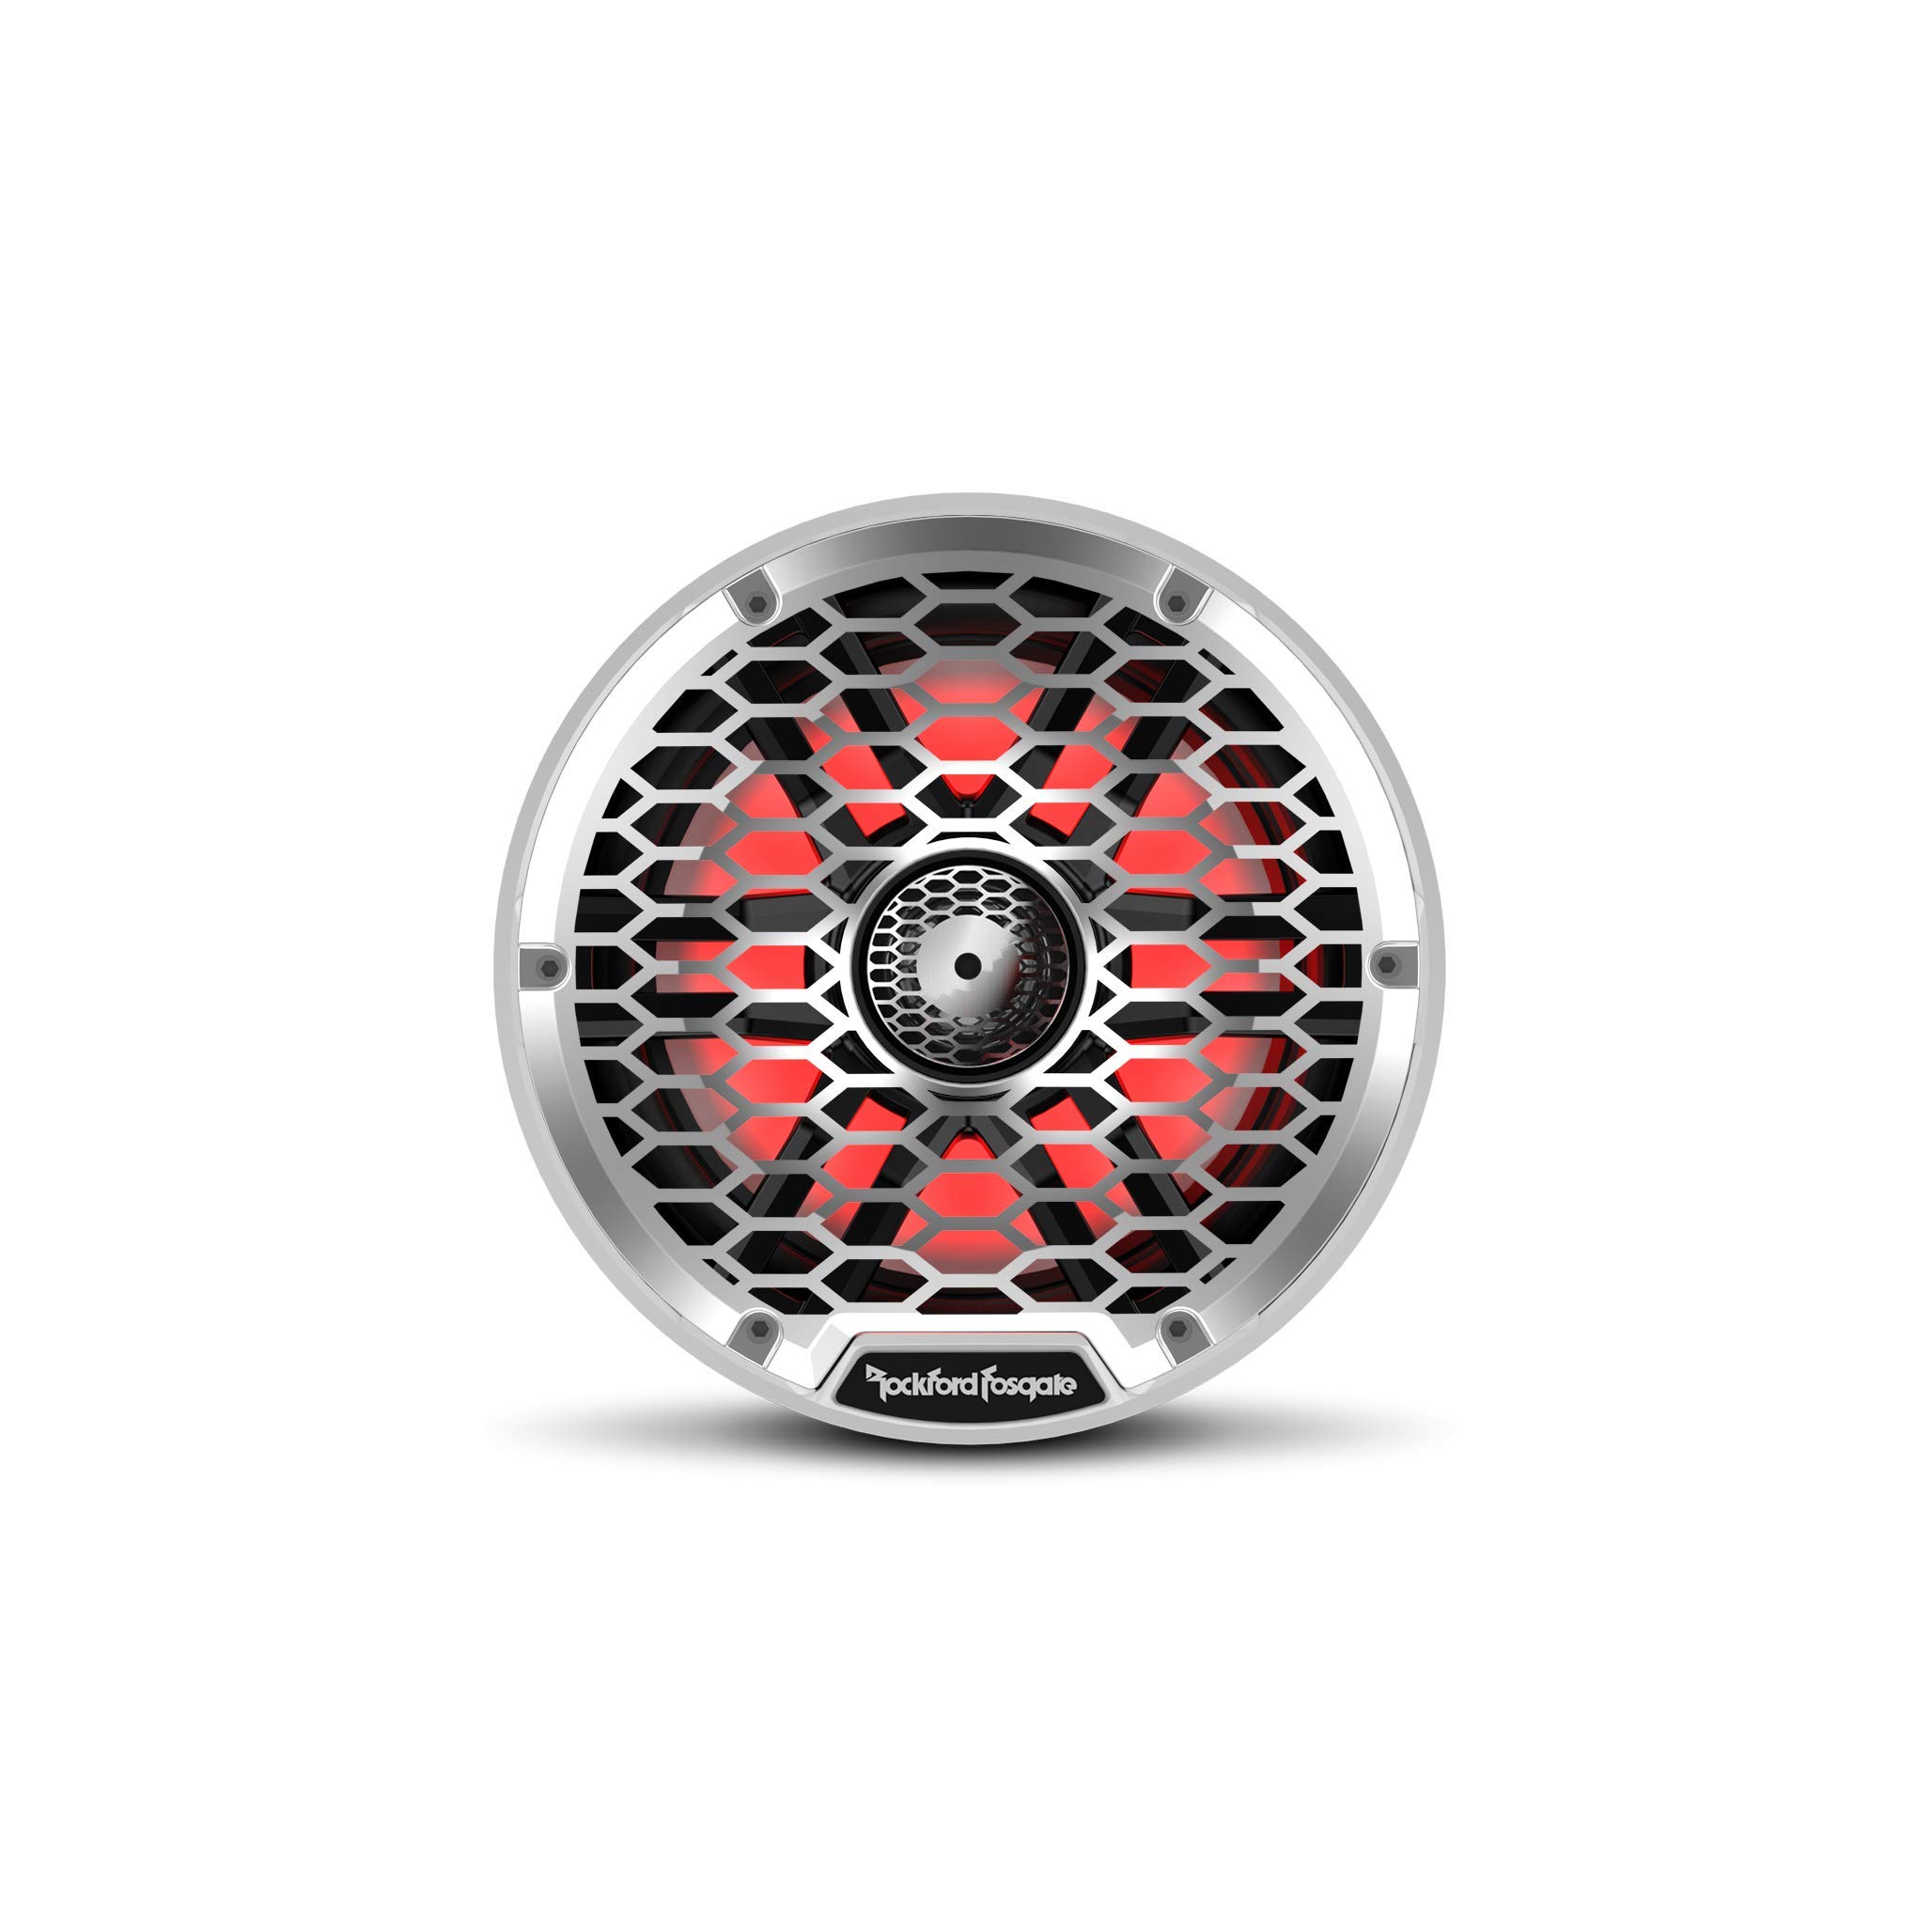 Rockford Fosgate M2-65 Color Optix 6.5” 2-Way Coaxial Multicolor LED Lighted Marine Speakers - White/Stainless (Pair)